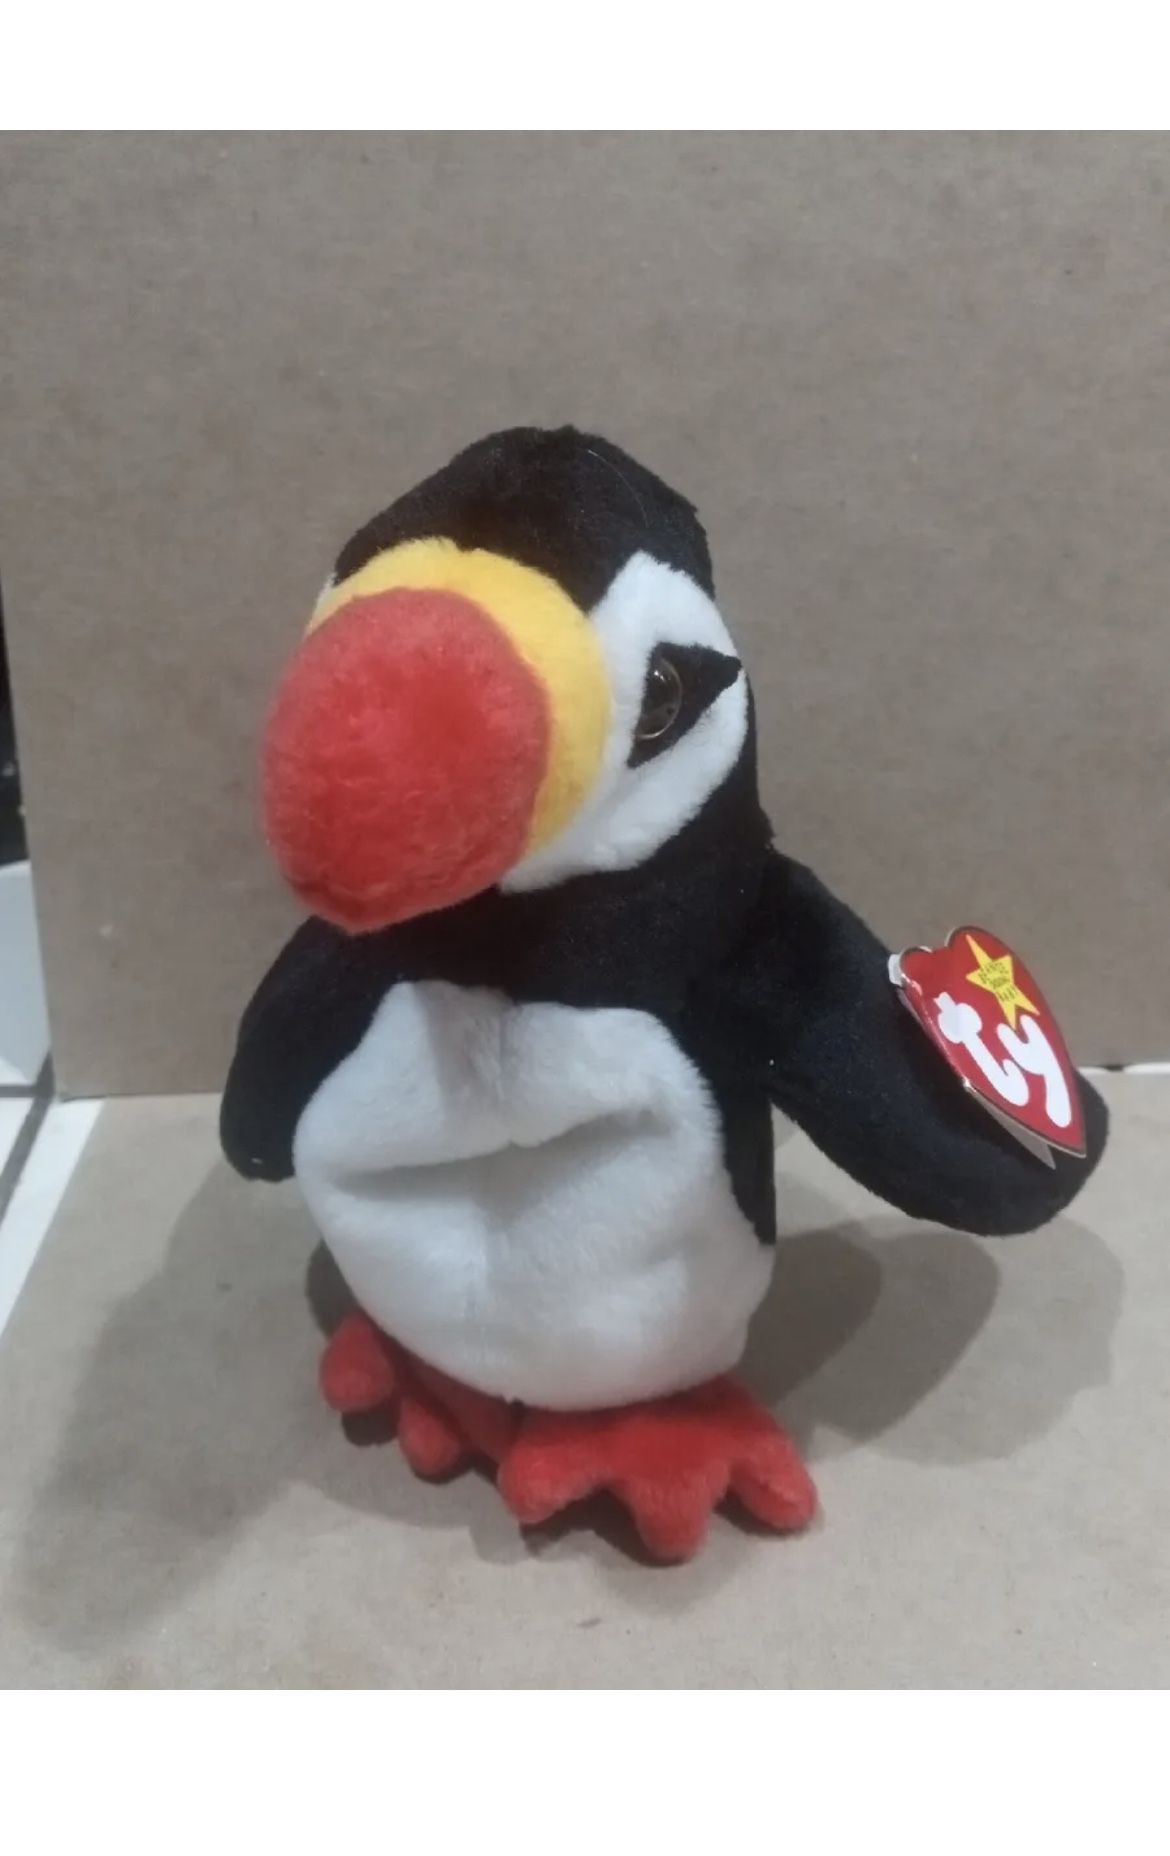 Wow Original 1997 TY Beanie Baby - PUFFER the Puffin (6 inch) - MWMTs Stuffed Animal Toy High Book Value For Only $3 ! Wow That’s Right Only $3 